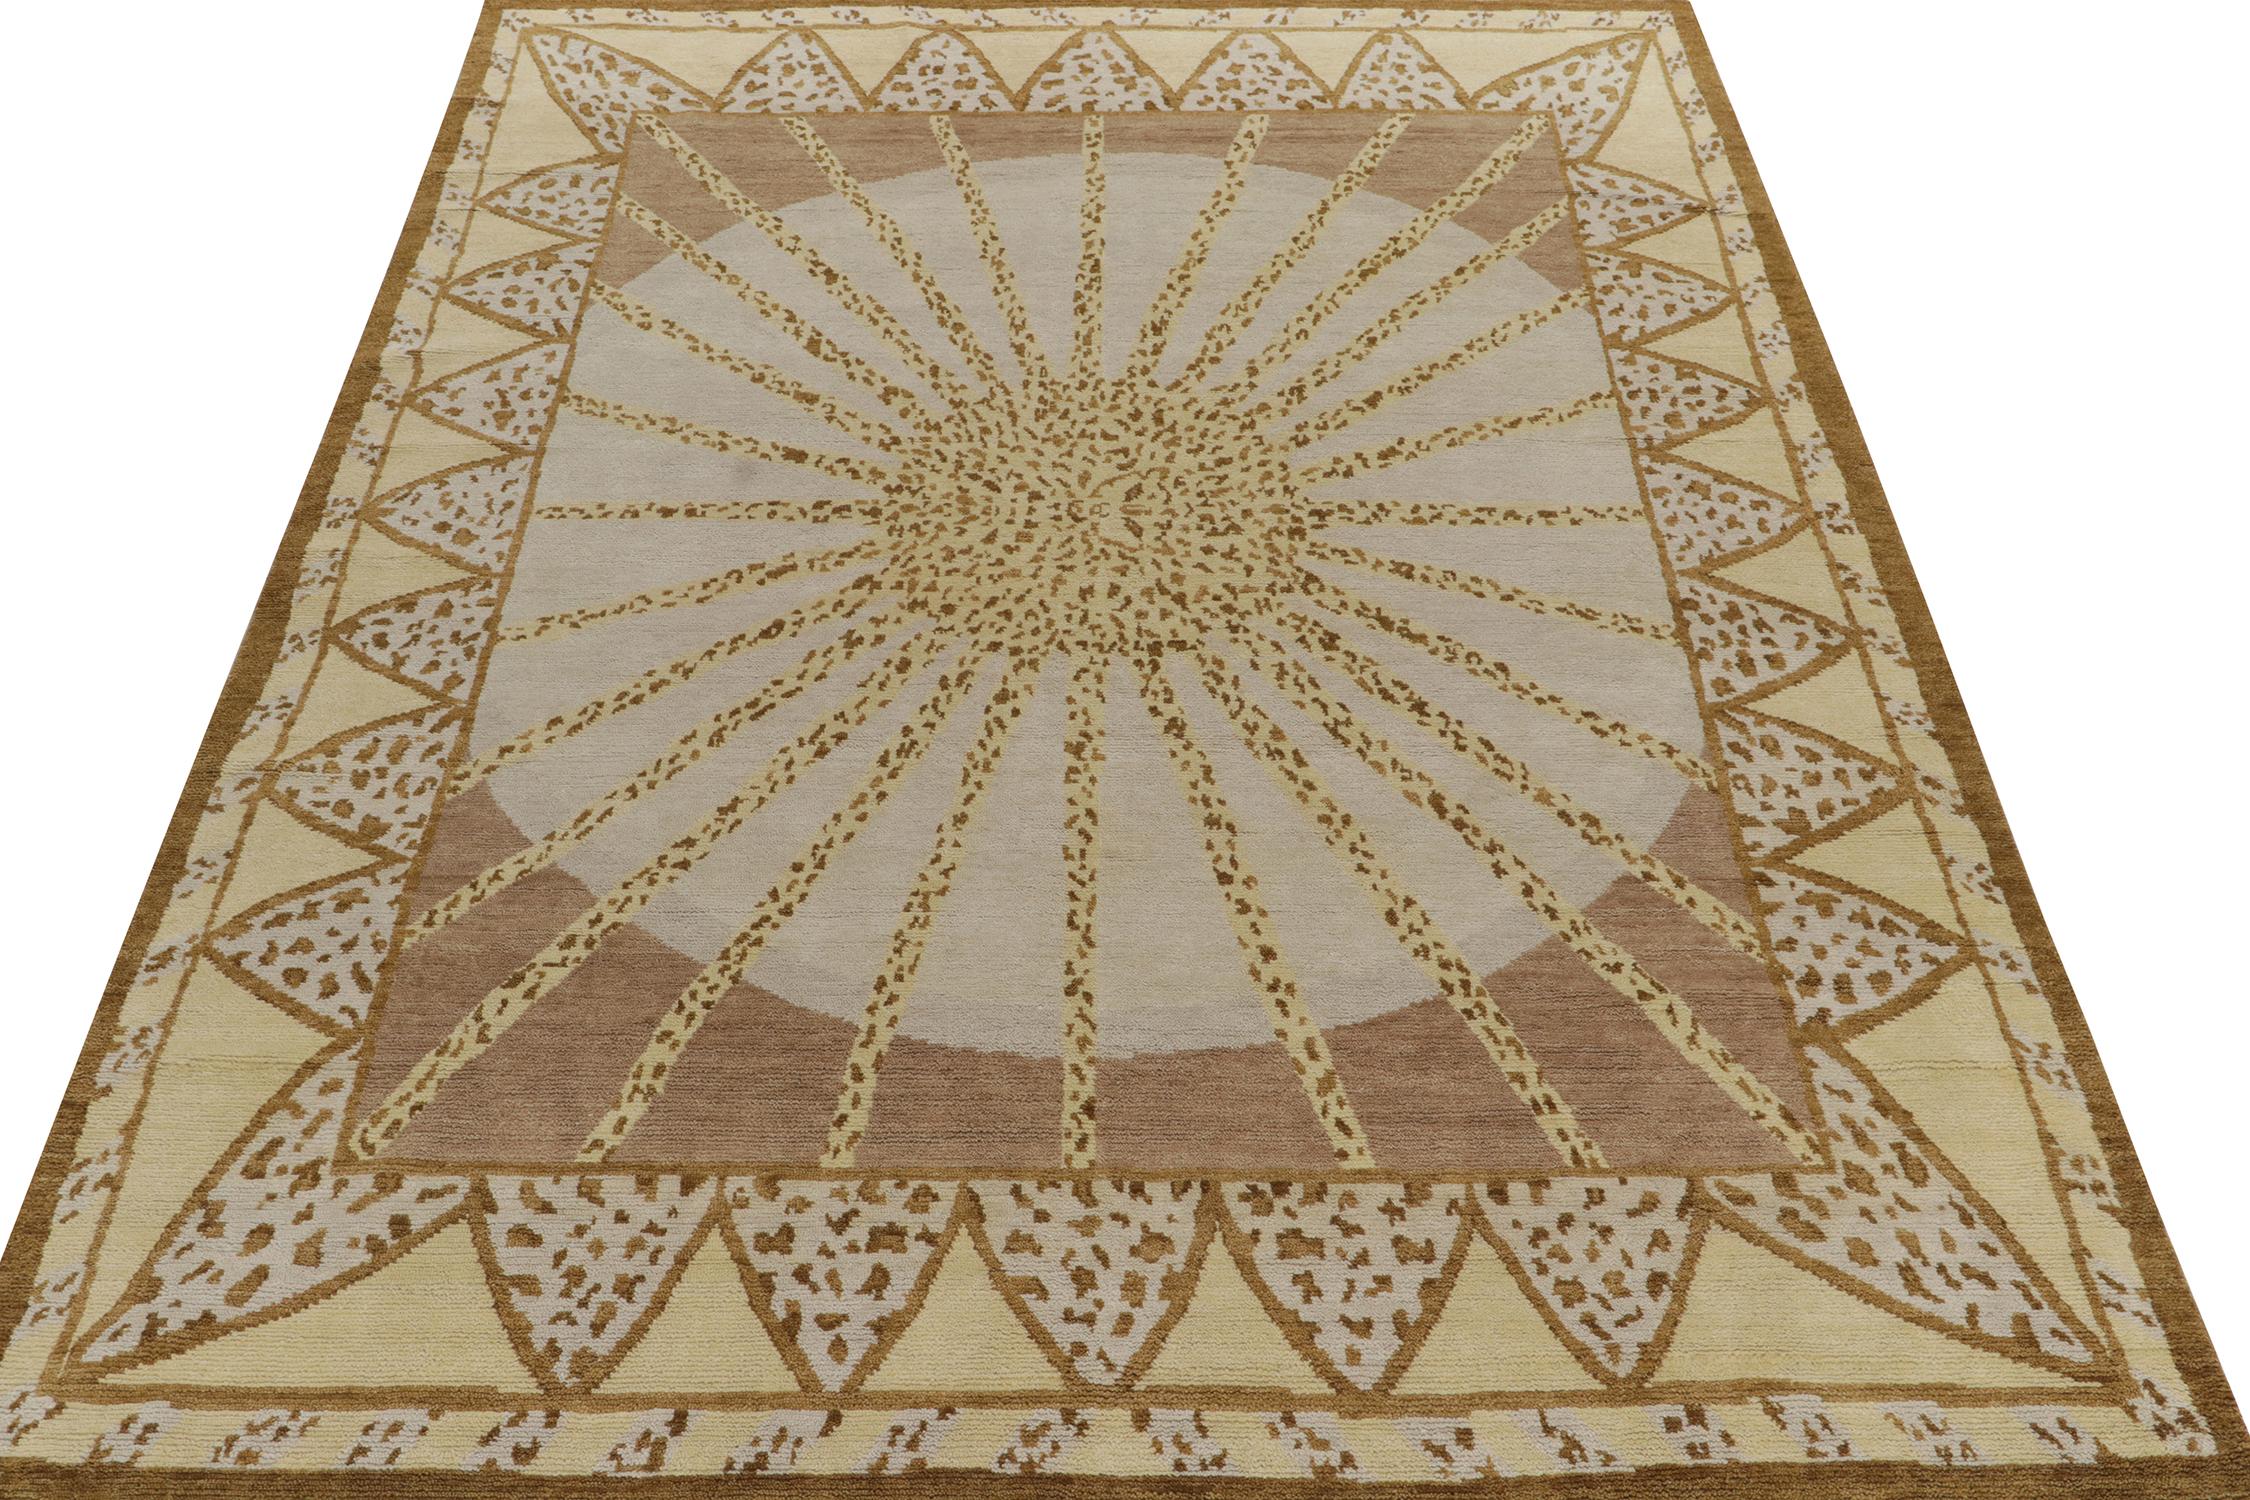 Art Deco Rug & Kilim’s French Deco Style Rug in Goldenrod and Beige-Brown Patterns For Sale